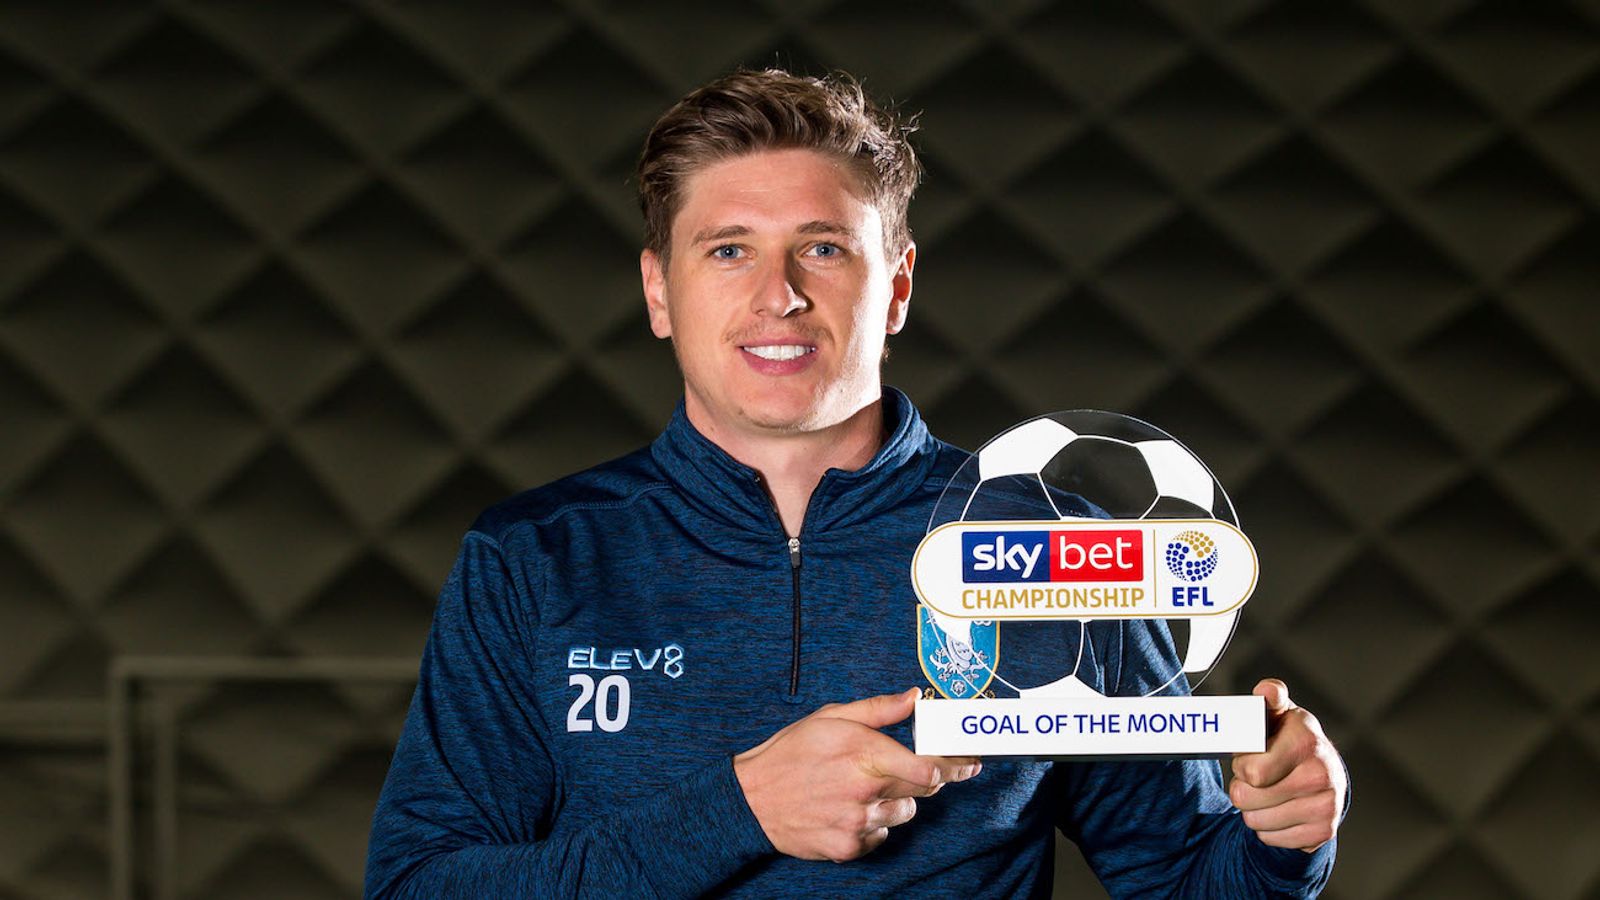 See the Sky Bet Goal of the Month August winners - The English